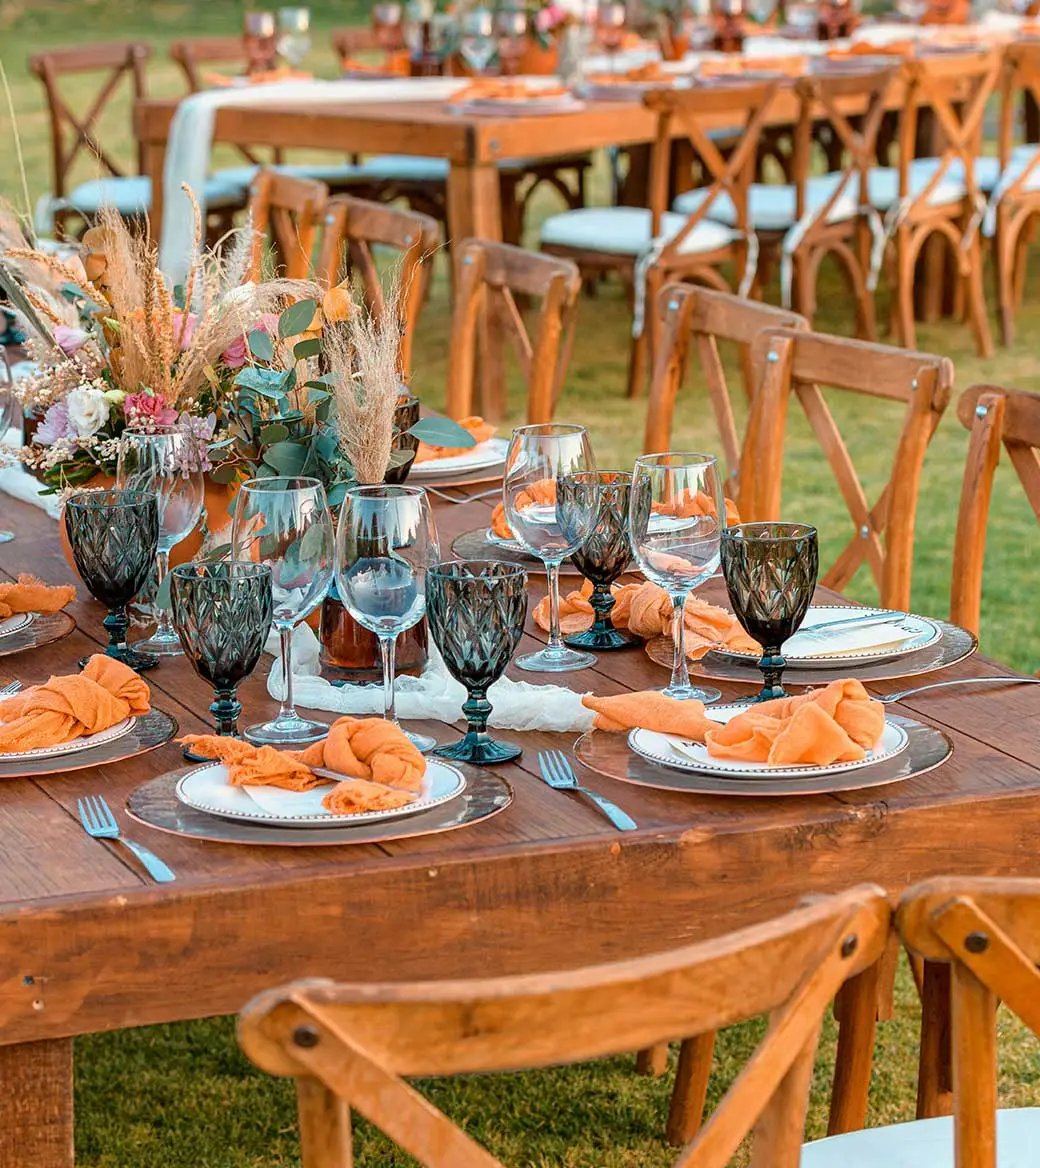 Outdoor banquet table setting with rustic decor.